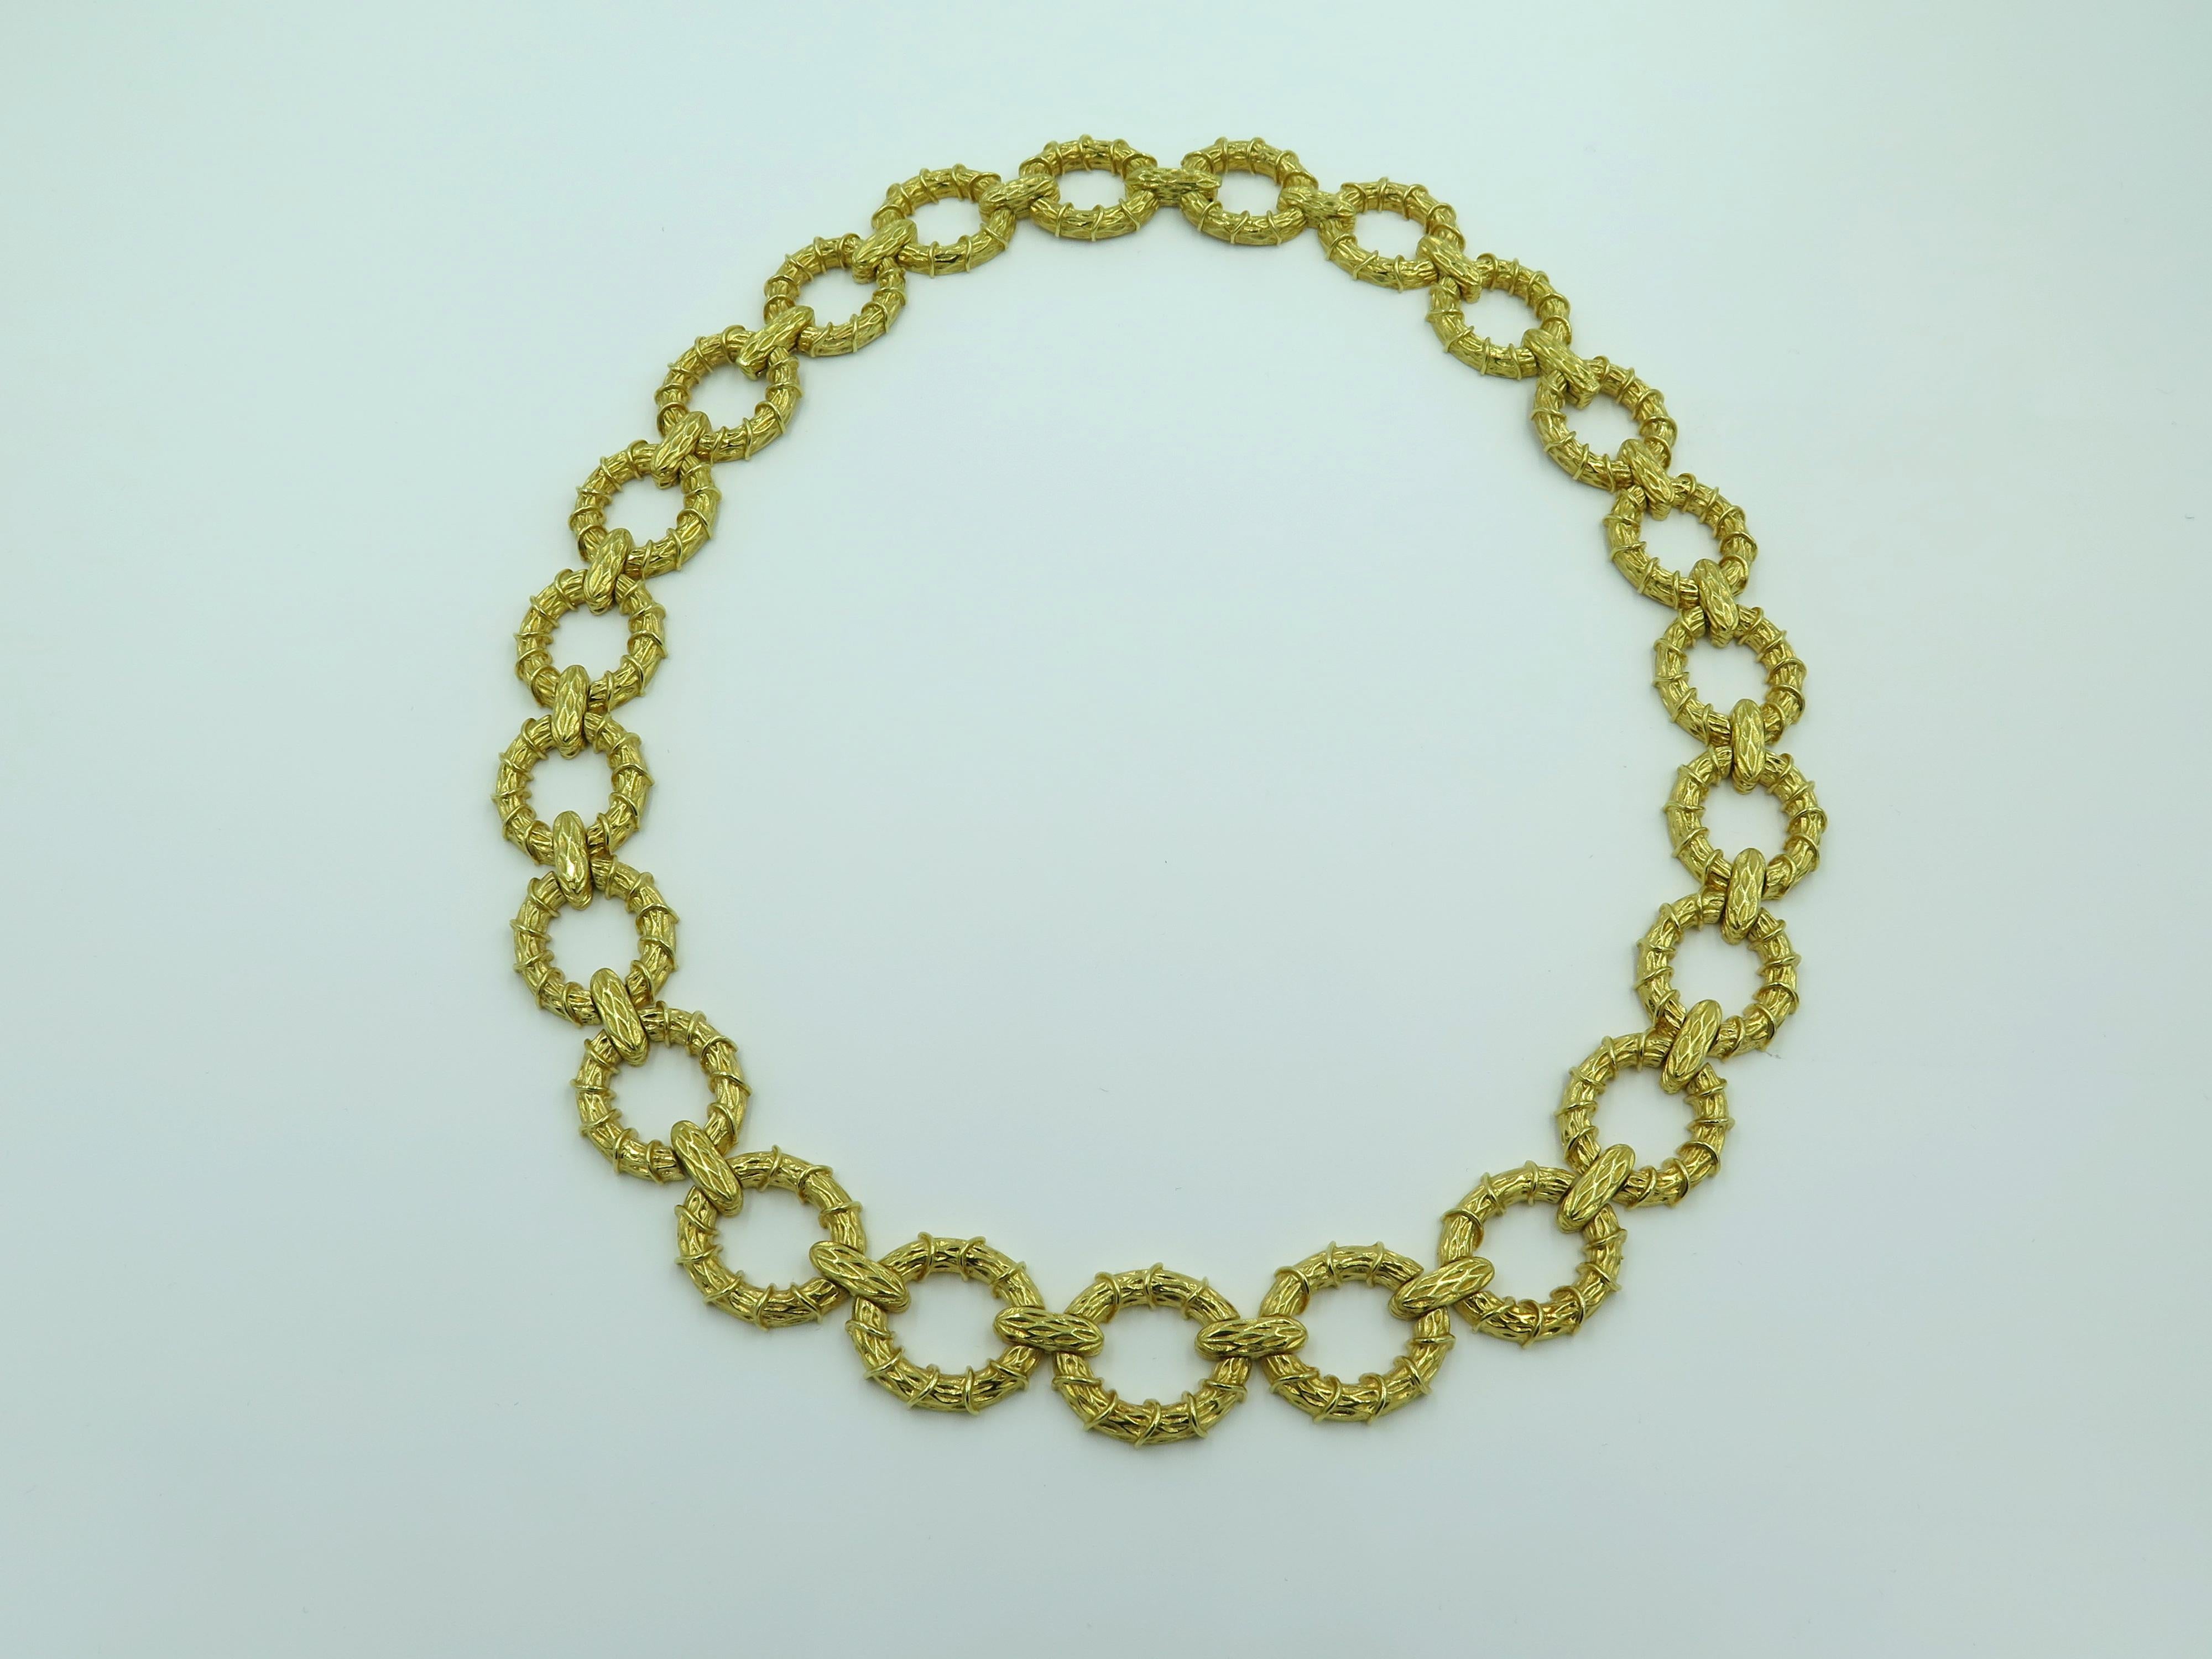 An 18 karat yellow gold necklace. Designed as textured gold oval links. Width is approximately 5/8 inches, length is approximately 19 inches, with 2 extenders, gross weight is approximately 145.3 grams.  